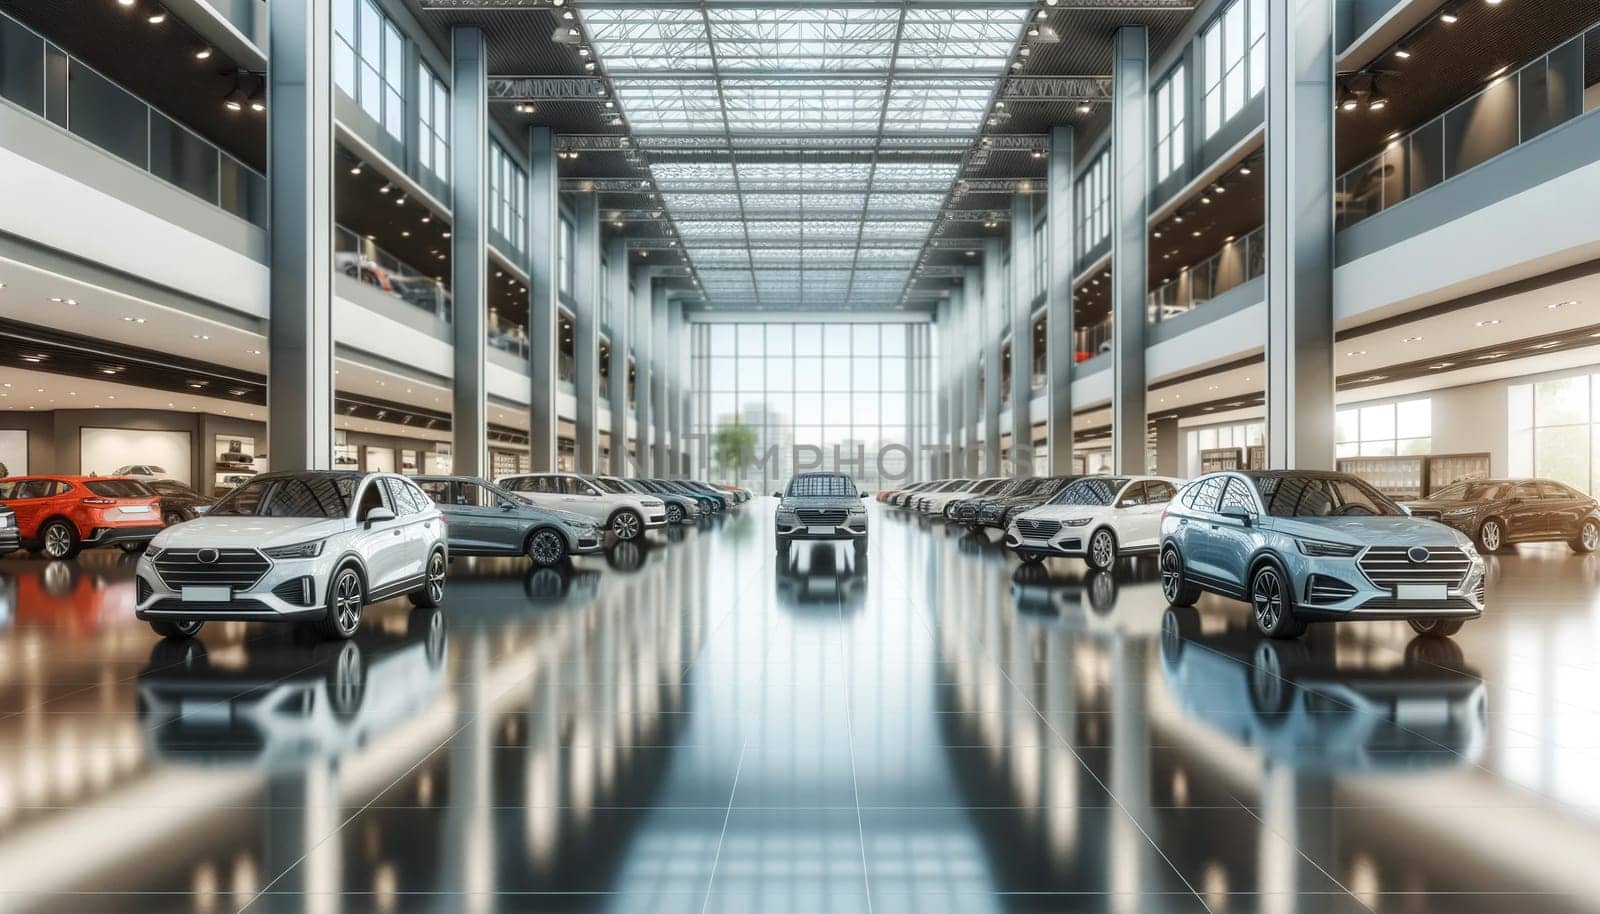 new cars in a large two-story car showroom.